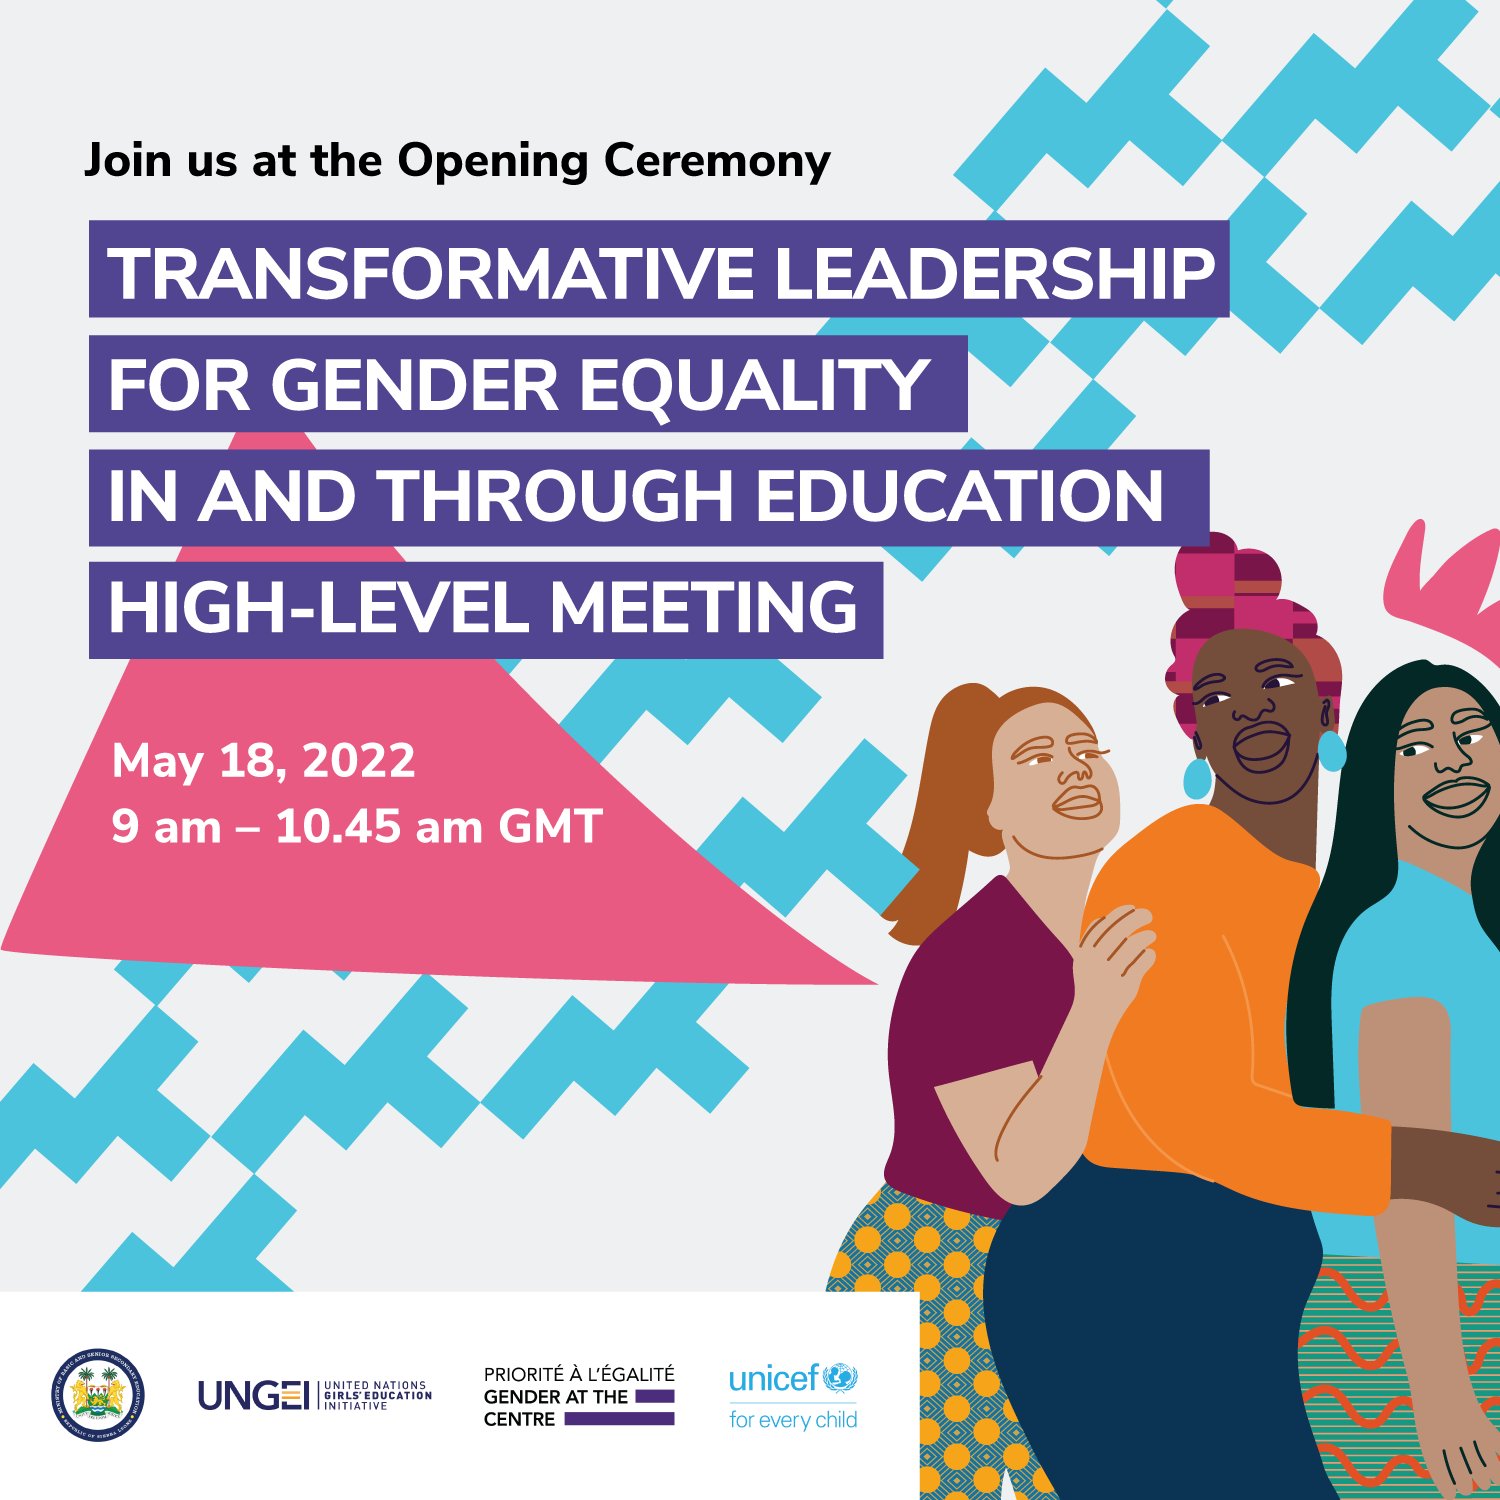 Transformative Leadership for Gender Equality in and through Education